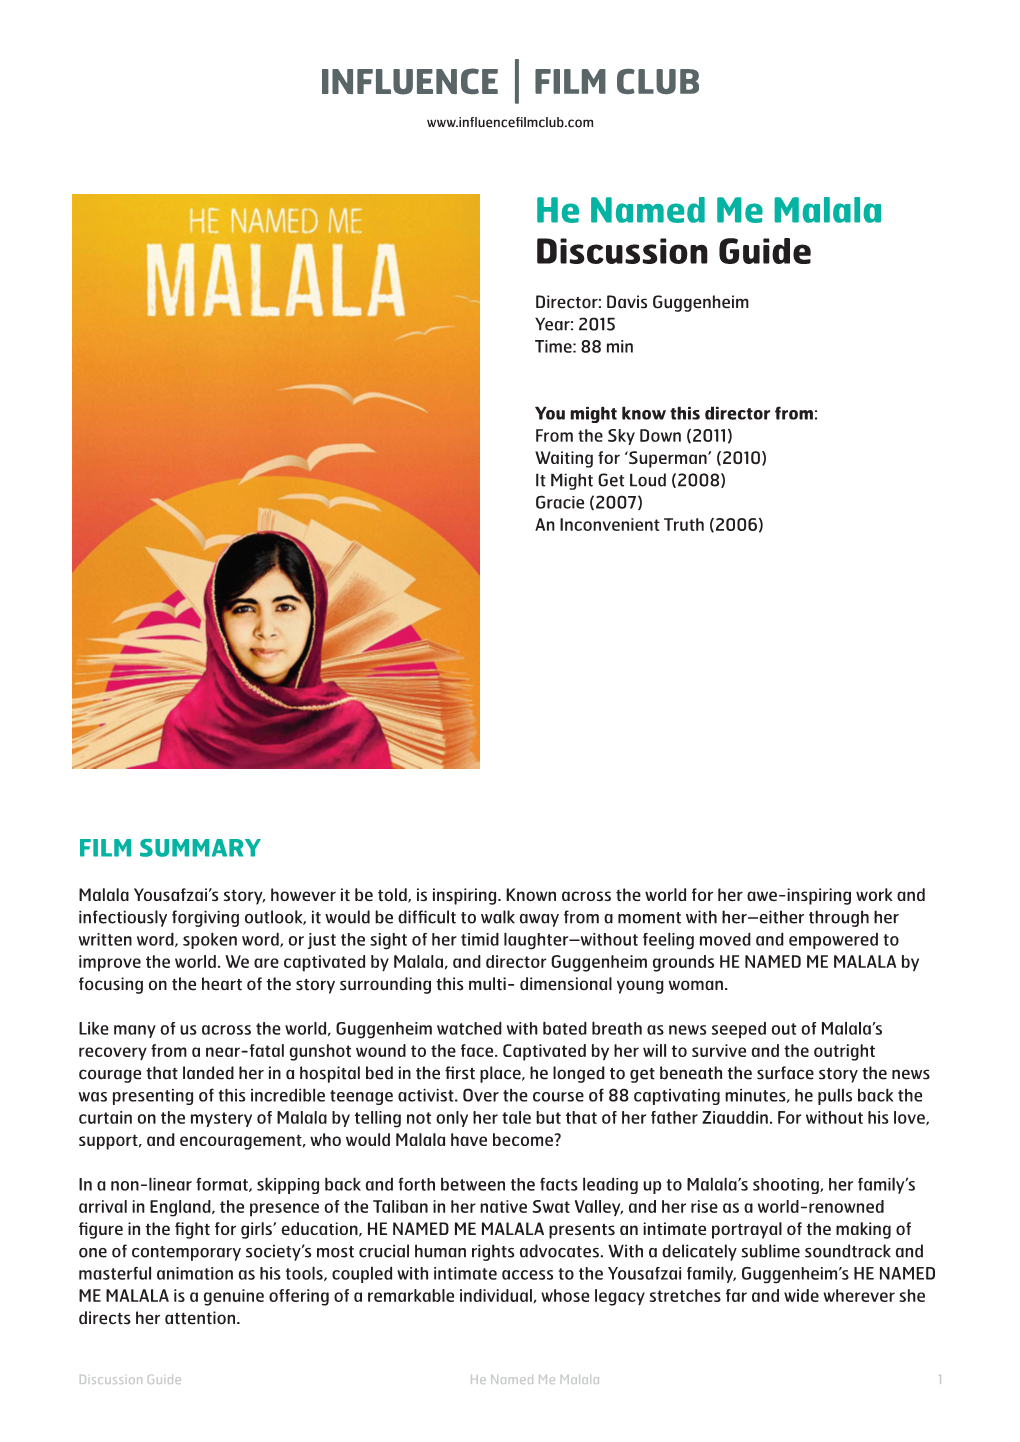 He Named Me Malala Discussion Guide